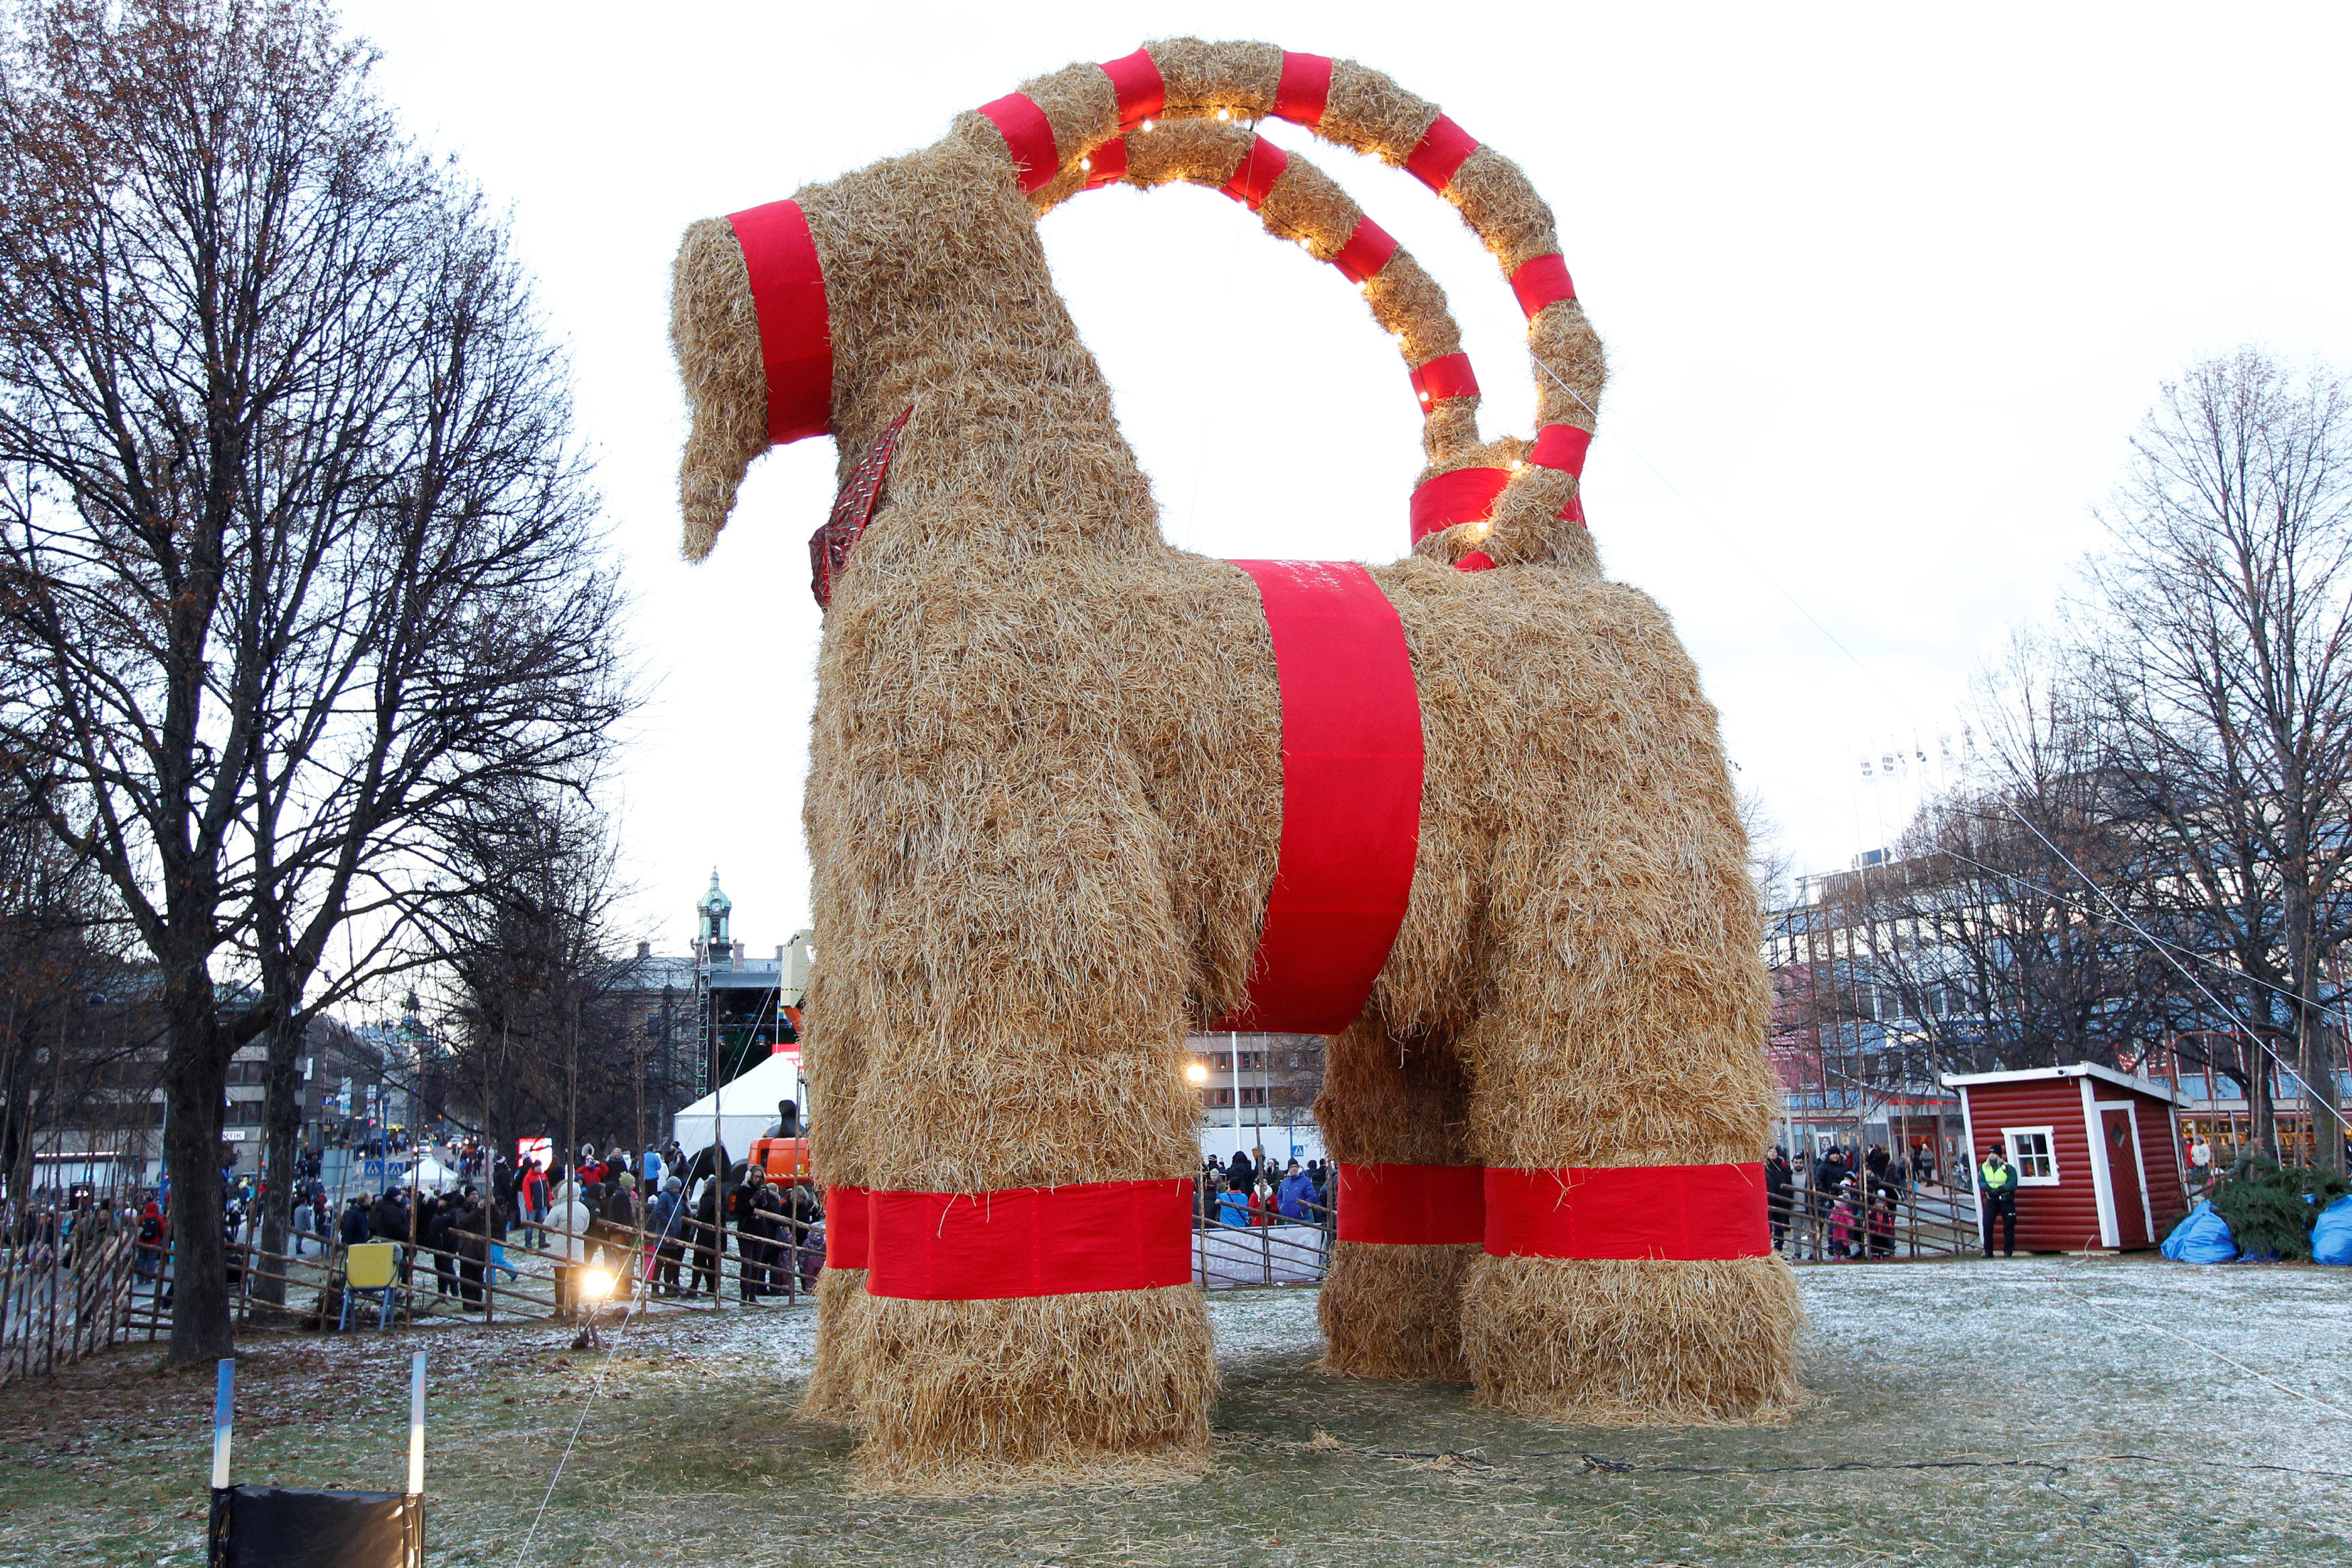 Sweden's Christmas Goat goes up in flames just hours after 50th